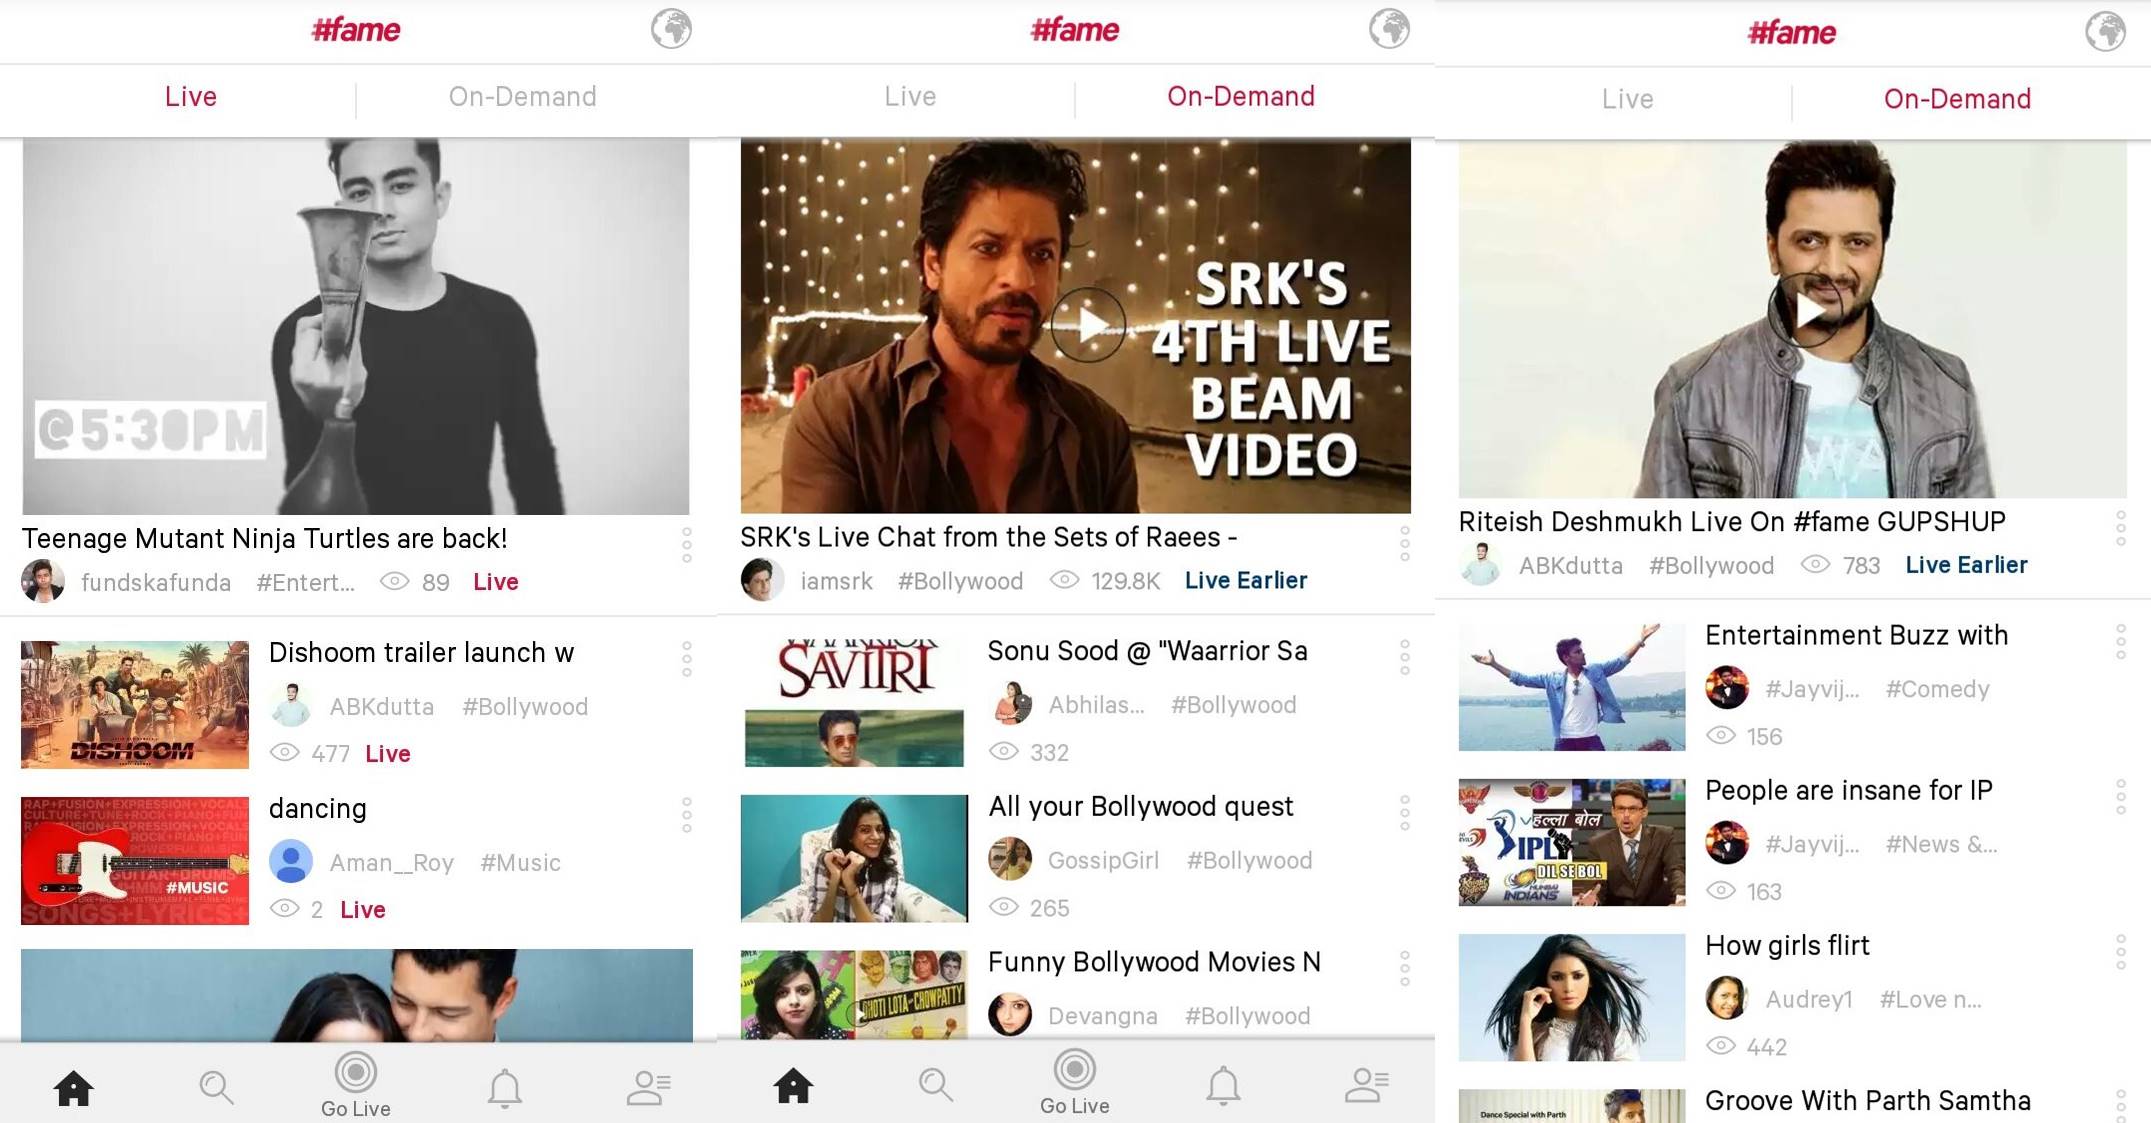 Top 5 Bollywood Gossip & Movie Review Apps For Bollywood Lovers - #fame